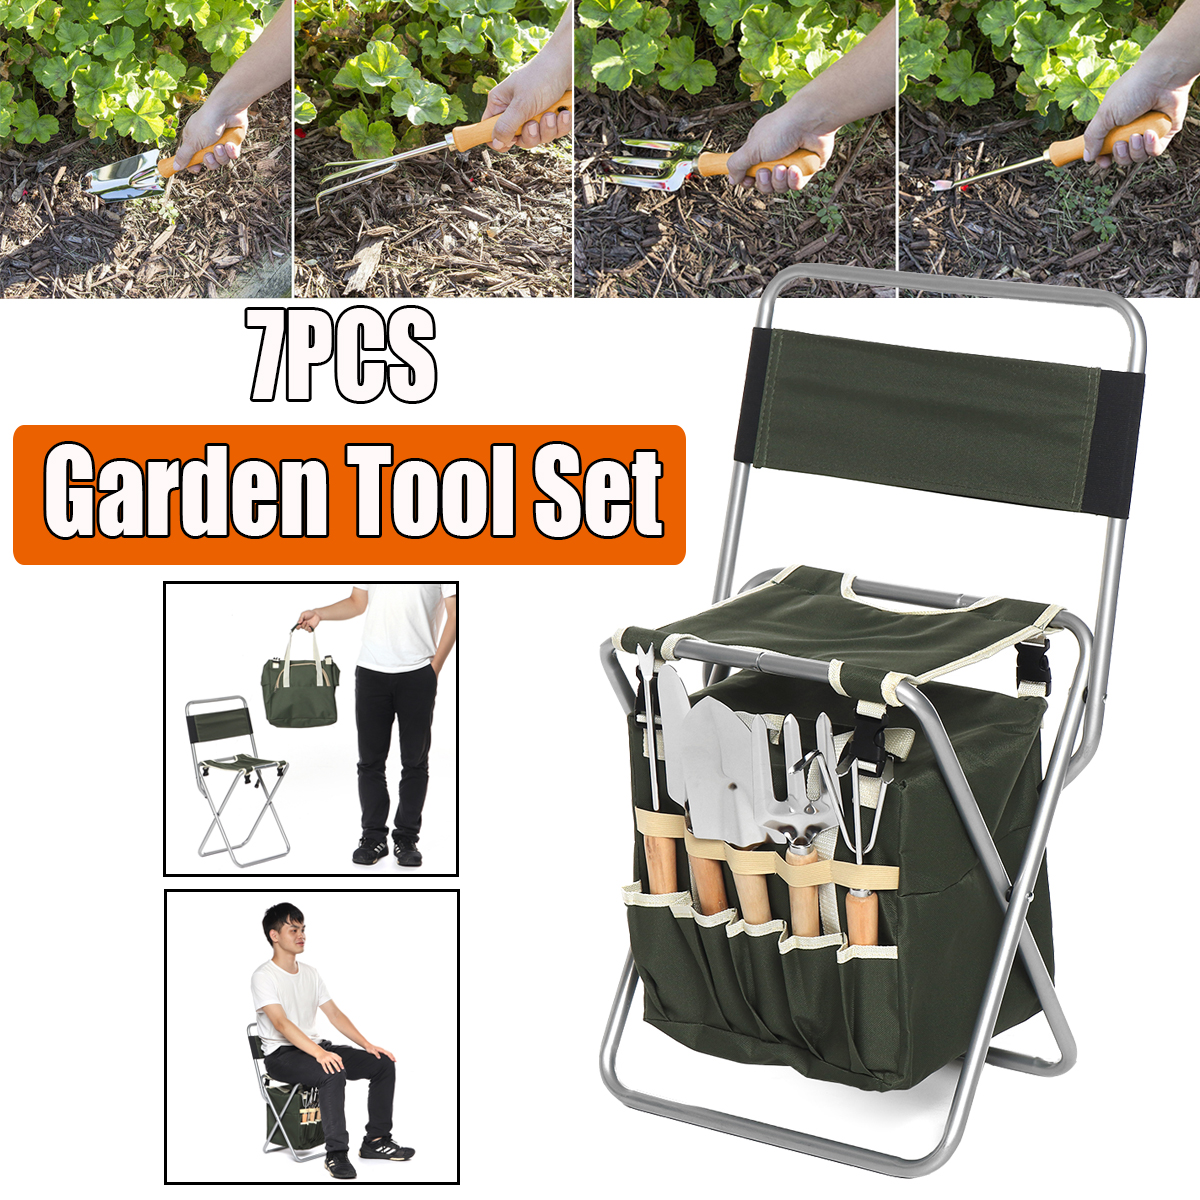 Portable-Folding-Fishing-Chair-Hiking-Camping-Storage-Backpack-Gardening-Tools-Storage-Oxford-Bags-S-1753364-1